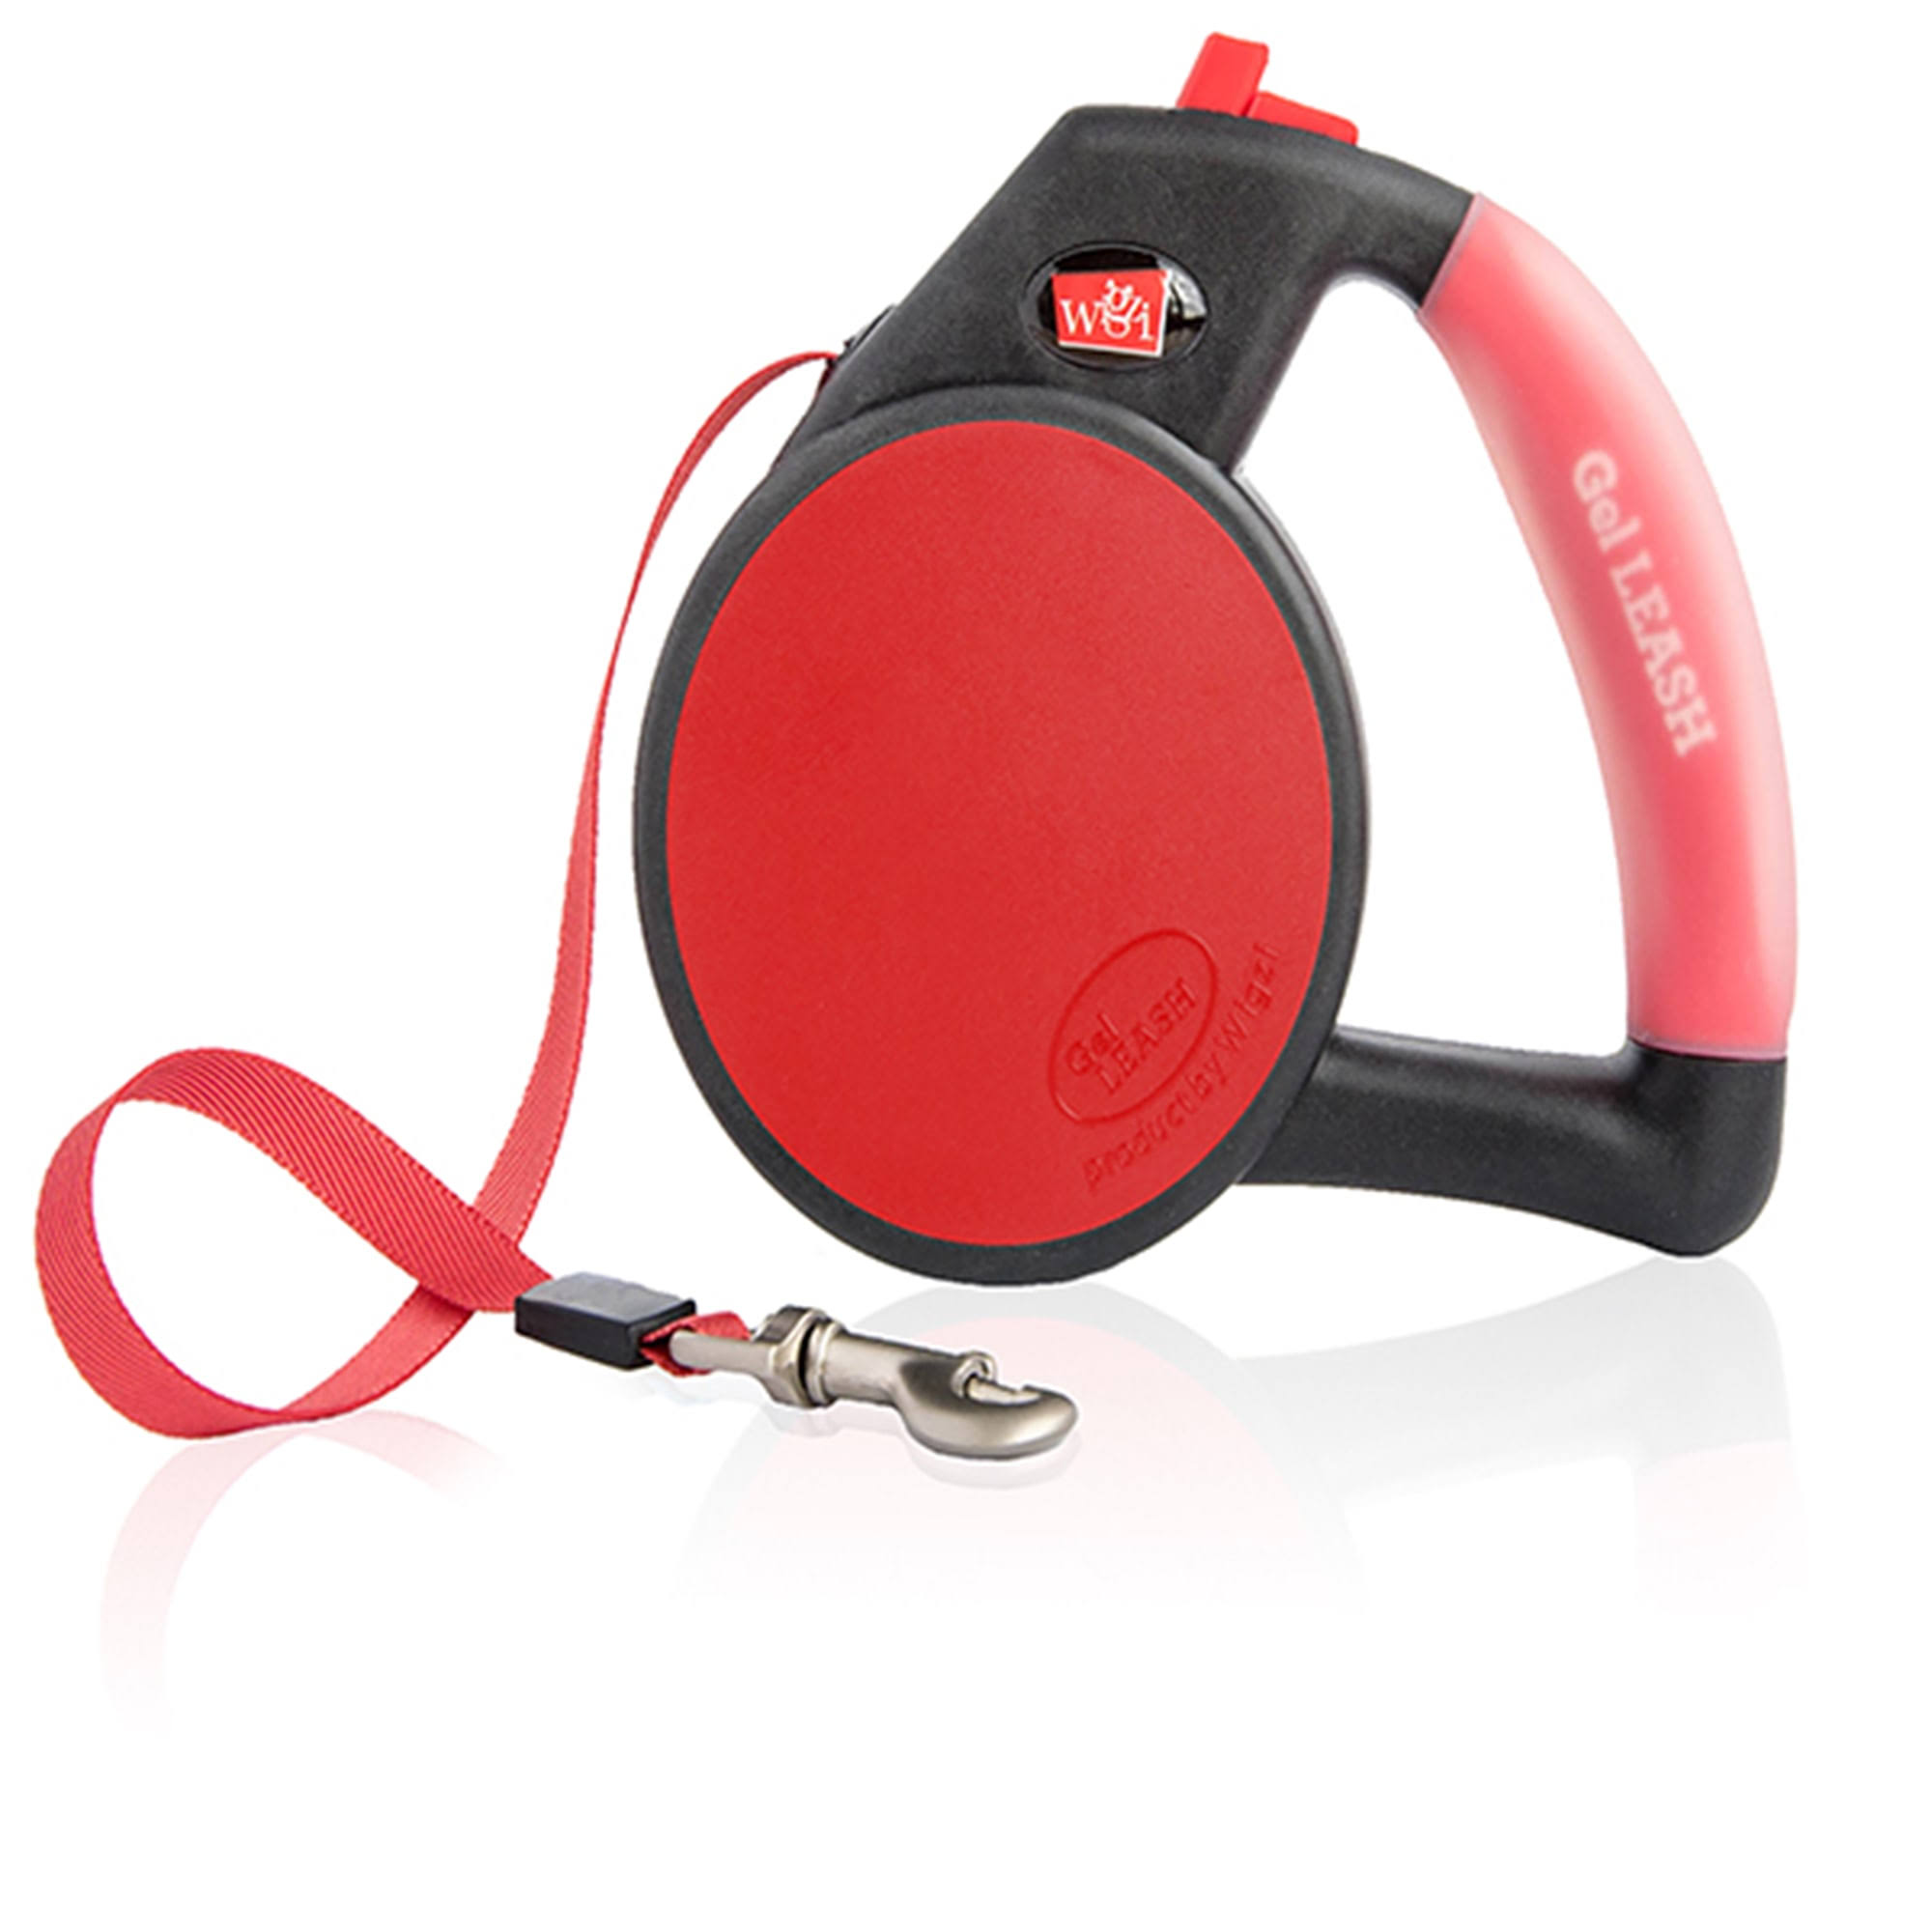 Wigzi Gel Retractable Dog Leash - Red, Large, for Dogs up to 110lbs